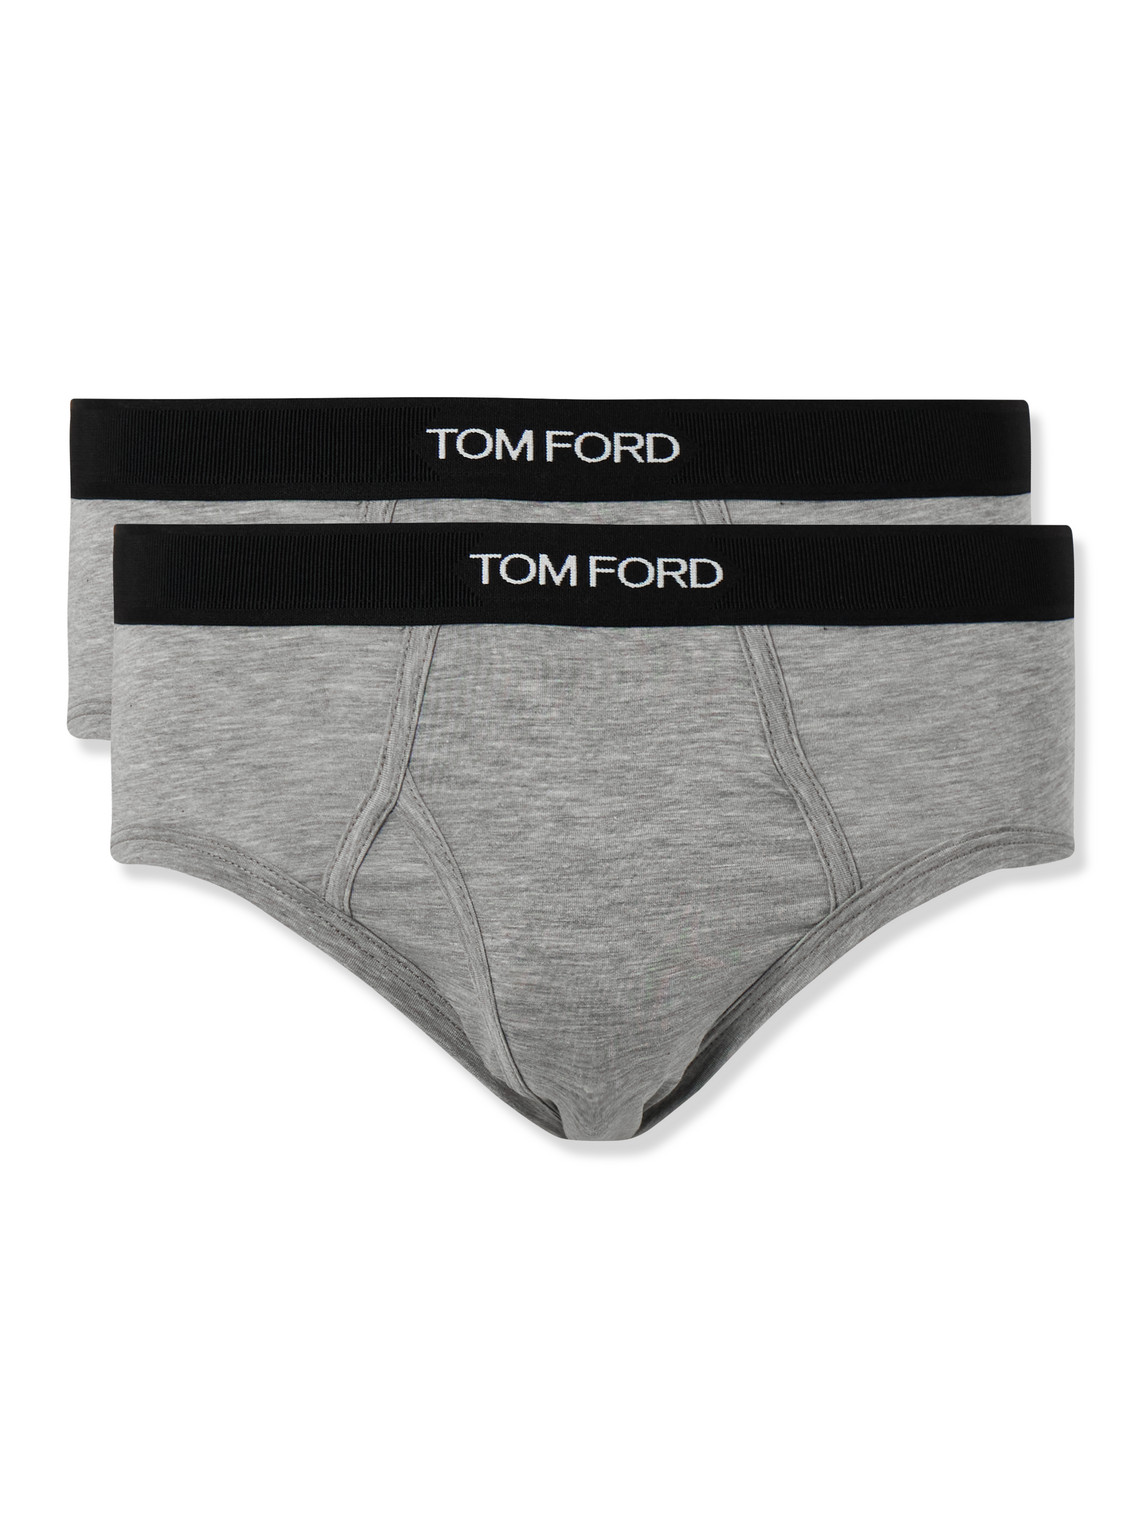 TOM FORD - Two-Pack Stretch-Cotton and Modal-Blend Briefs - Men - Gray - S von TOM FORD